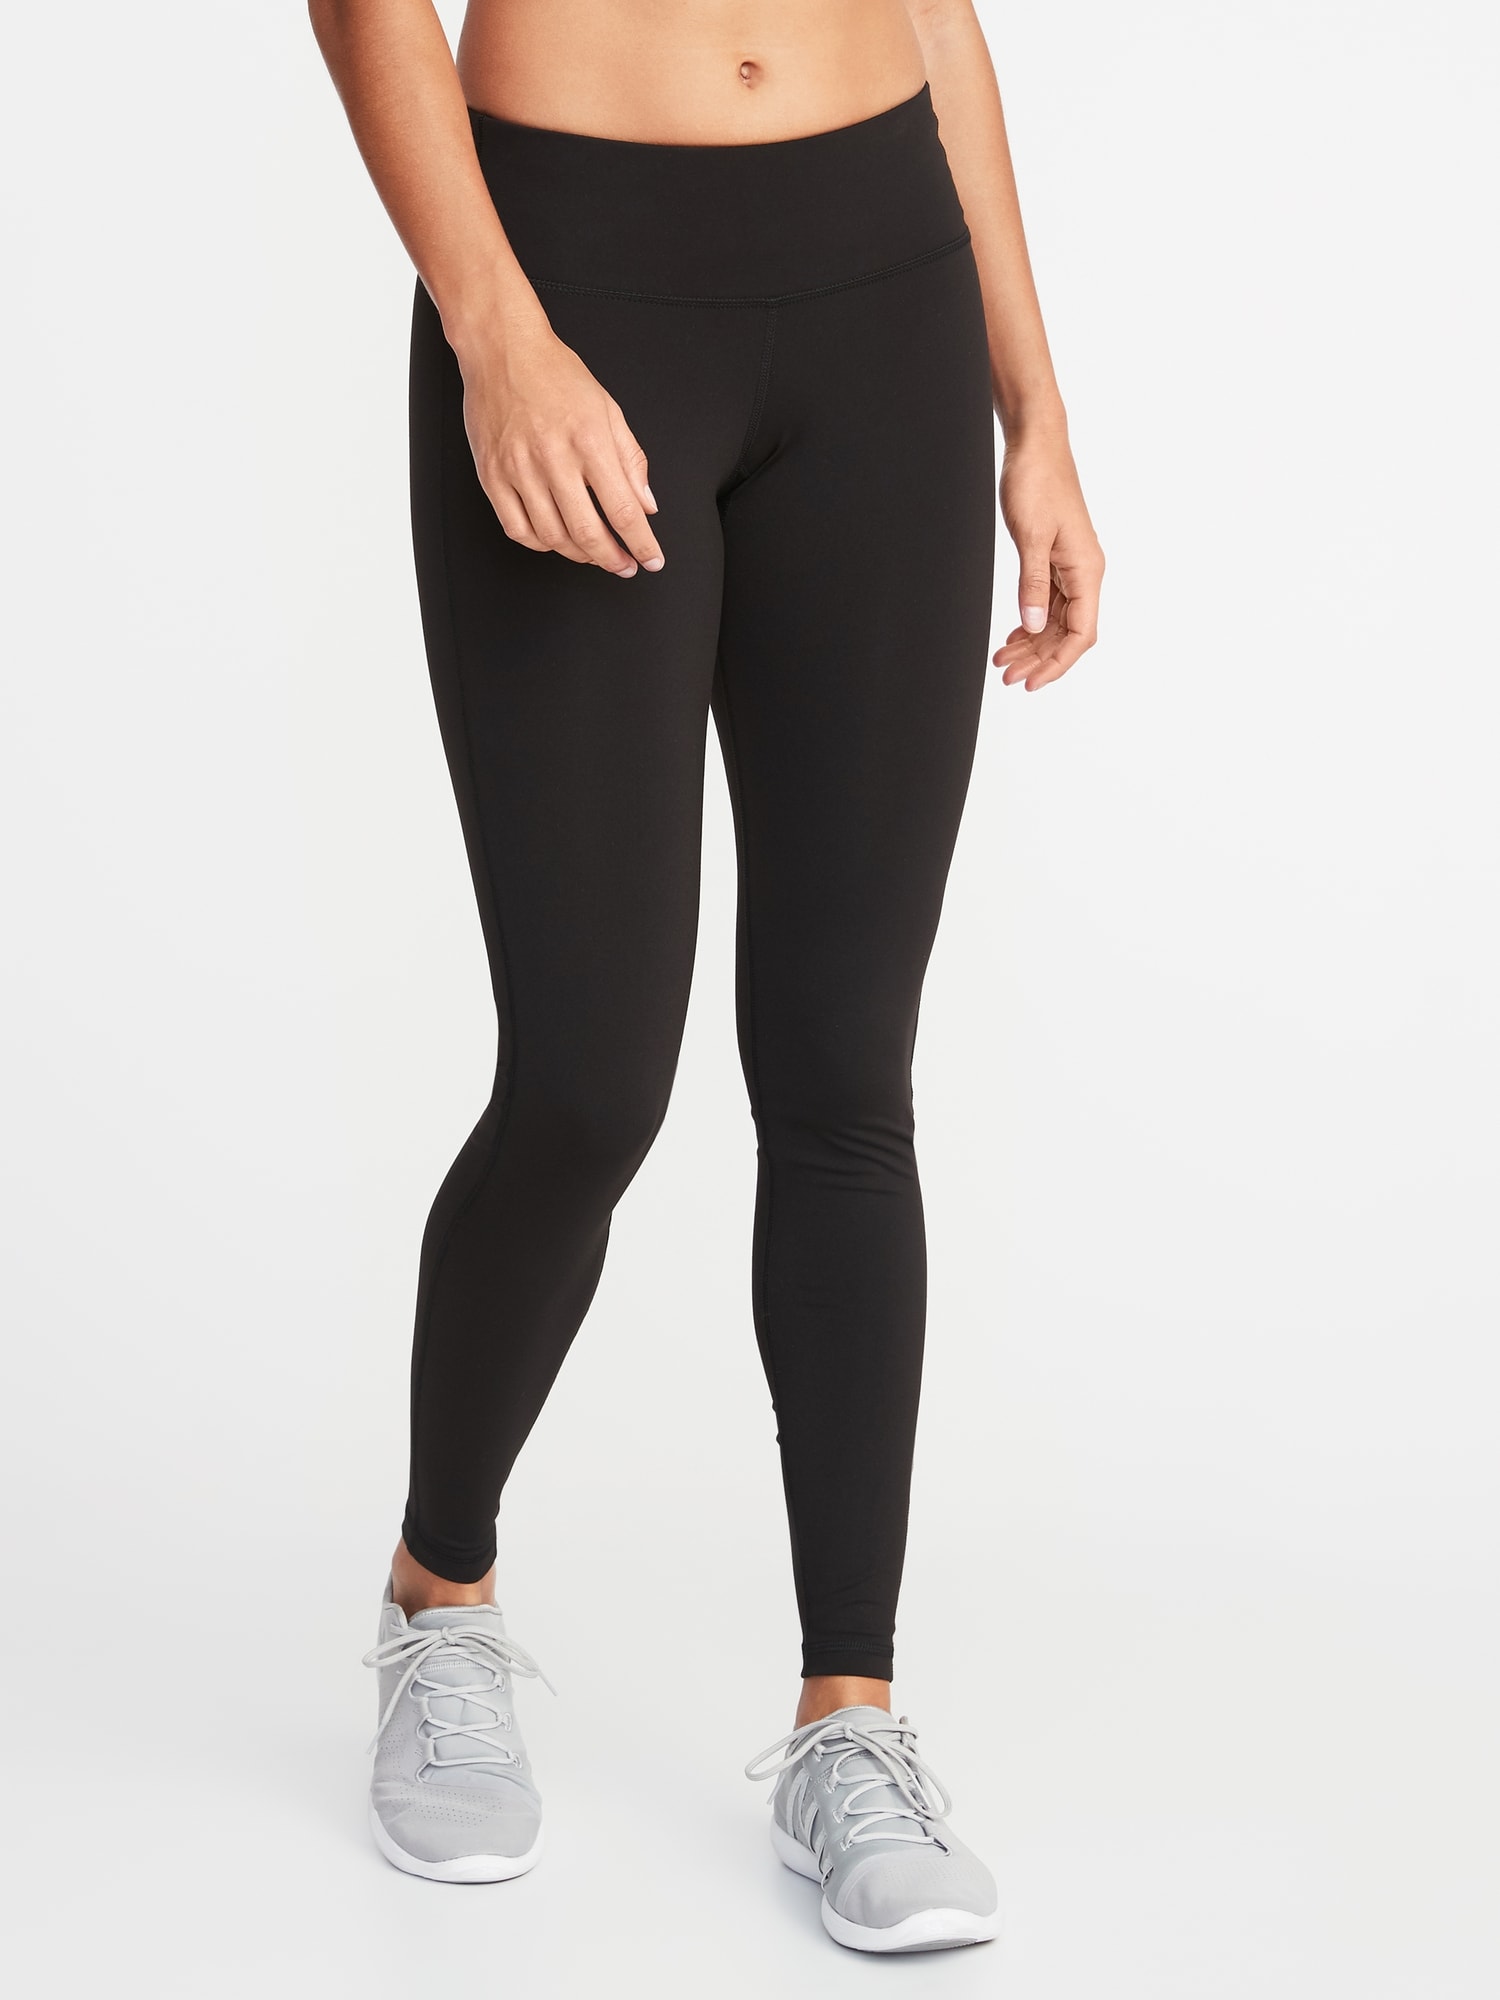 Compression Leggings For Women  International Society of Precision  Agriculture